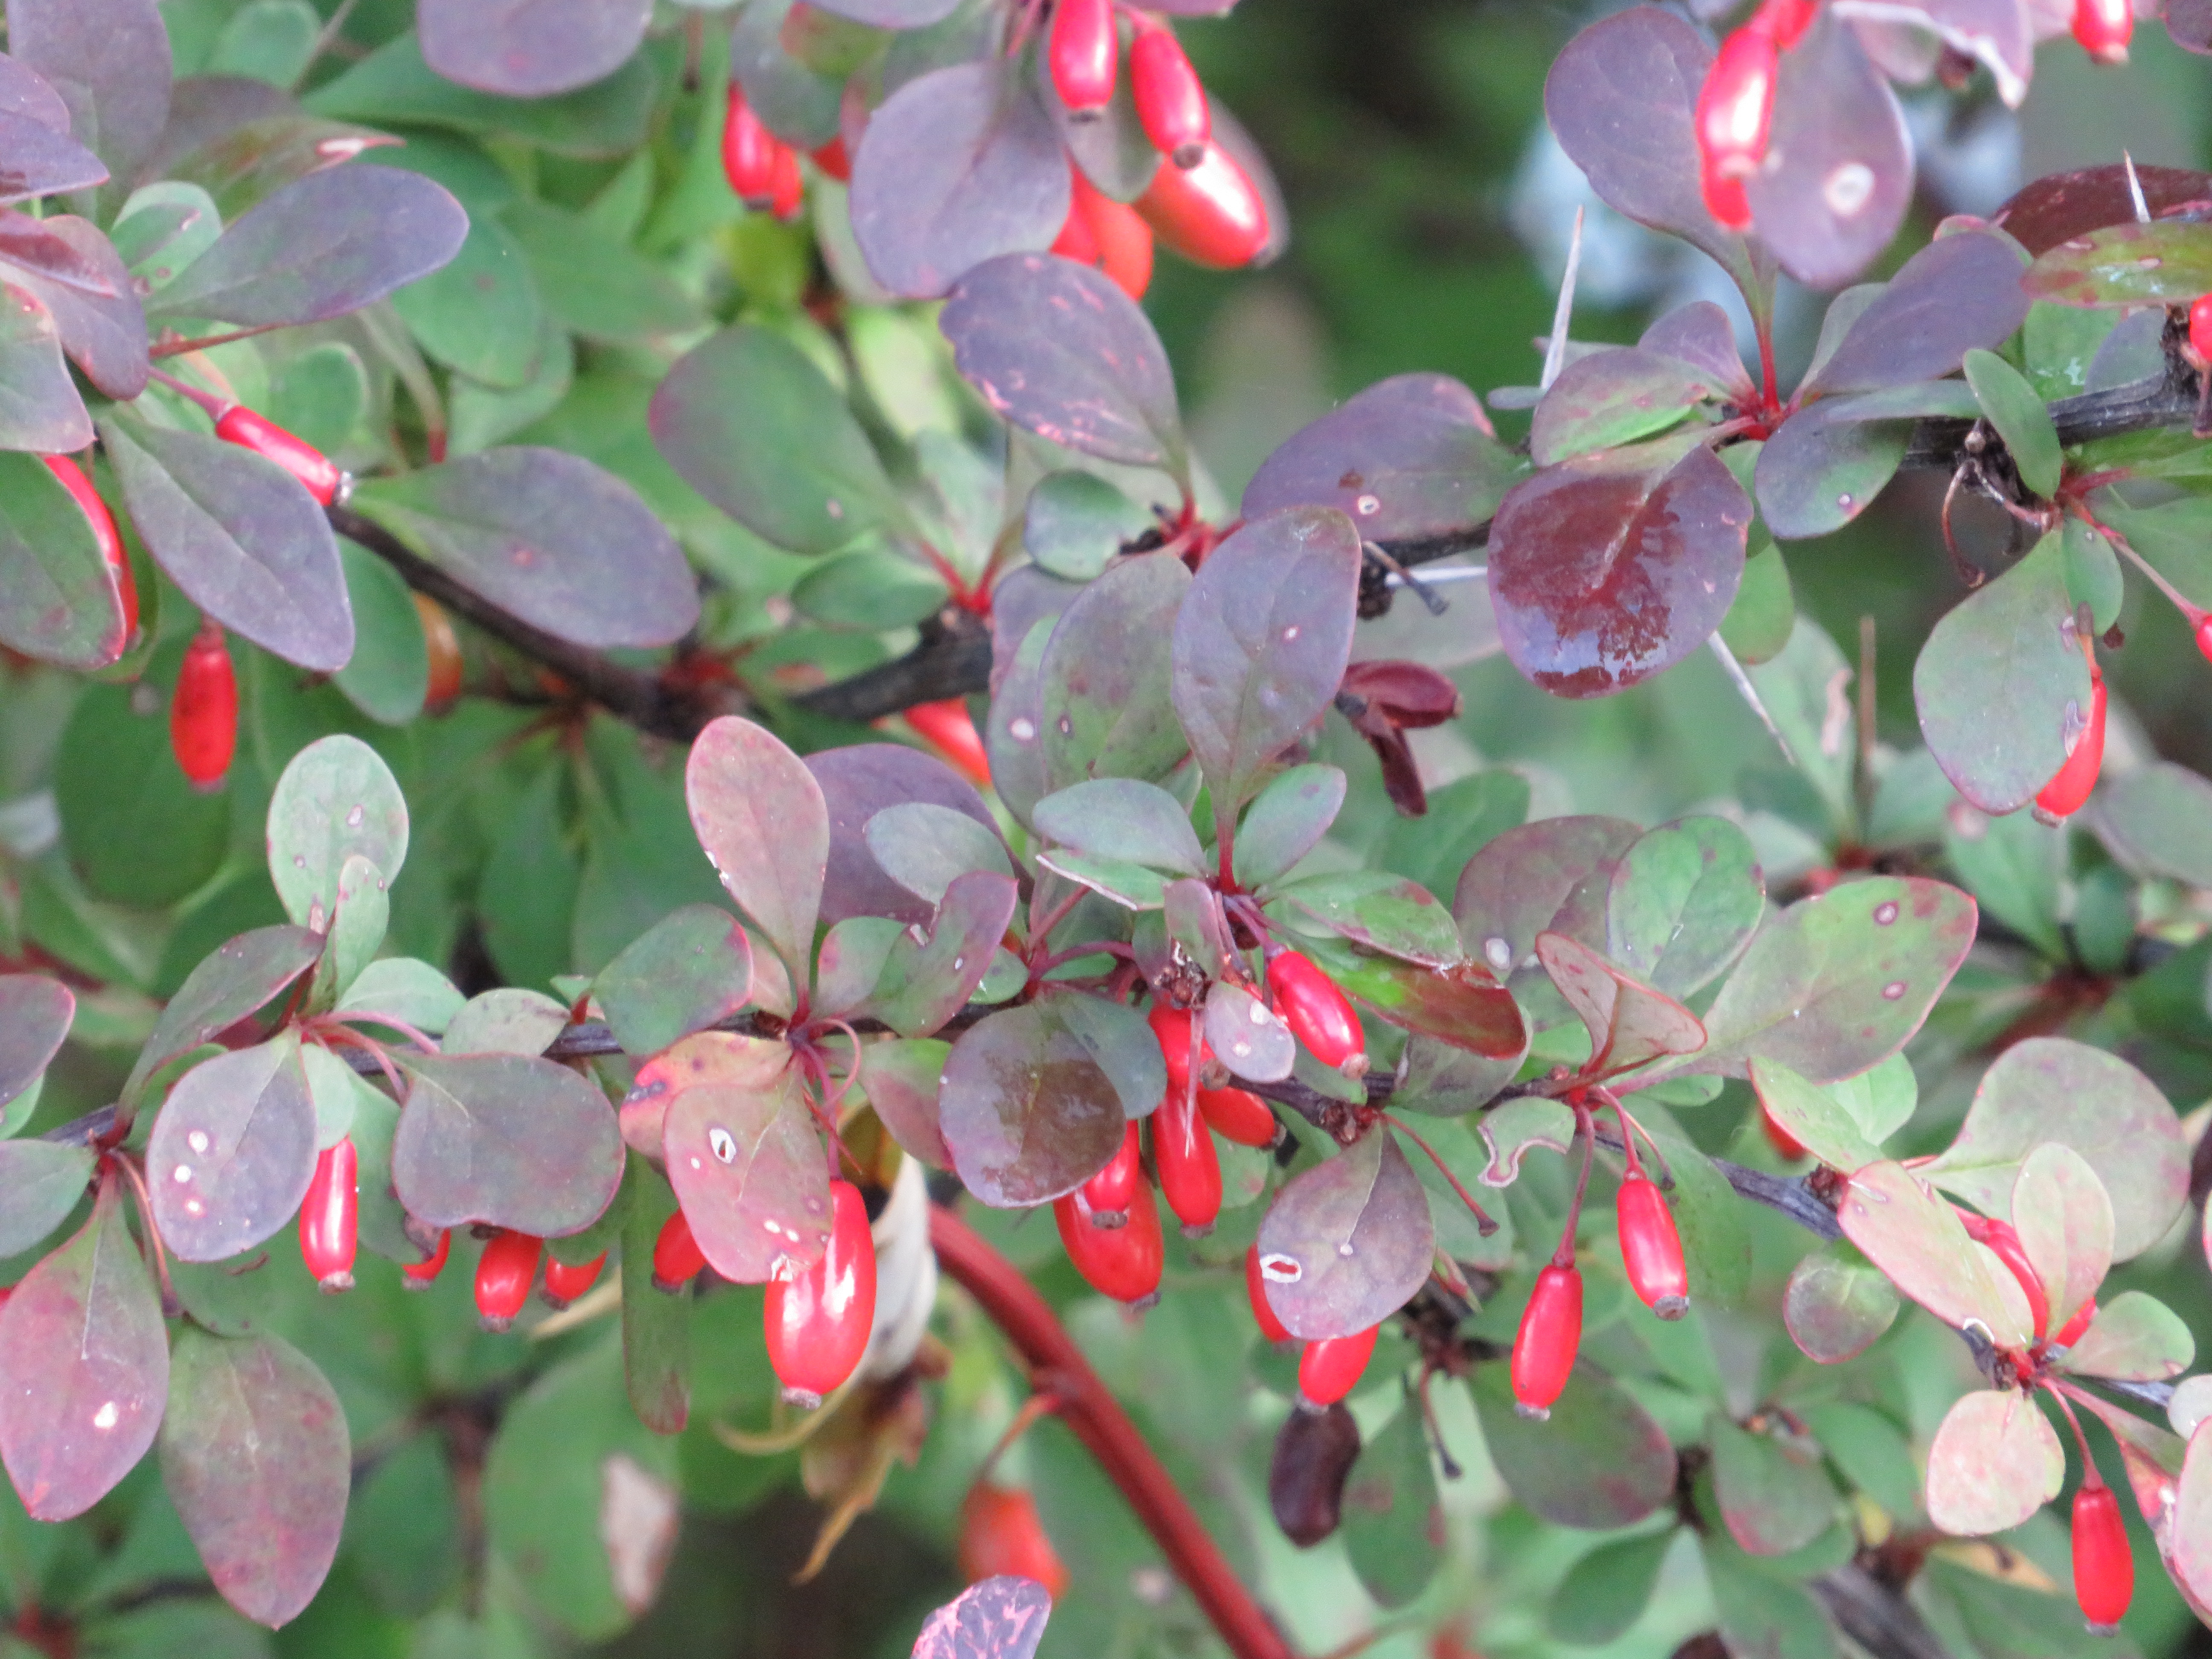 Japanese Barberry and Winged Burning Bush: Invasive Landscaping Shrubs Threaten Michigan Forests